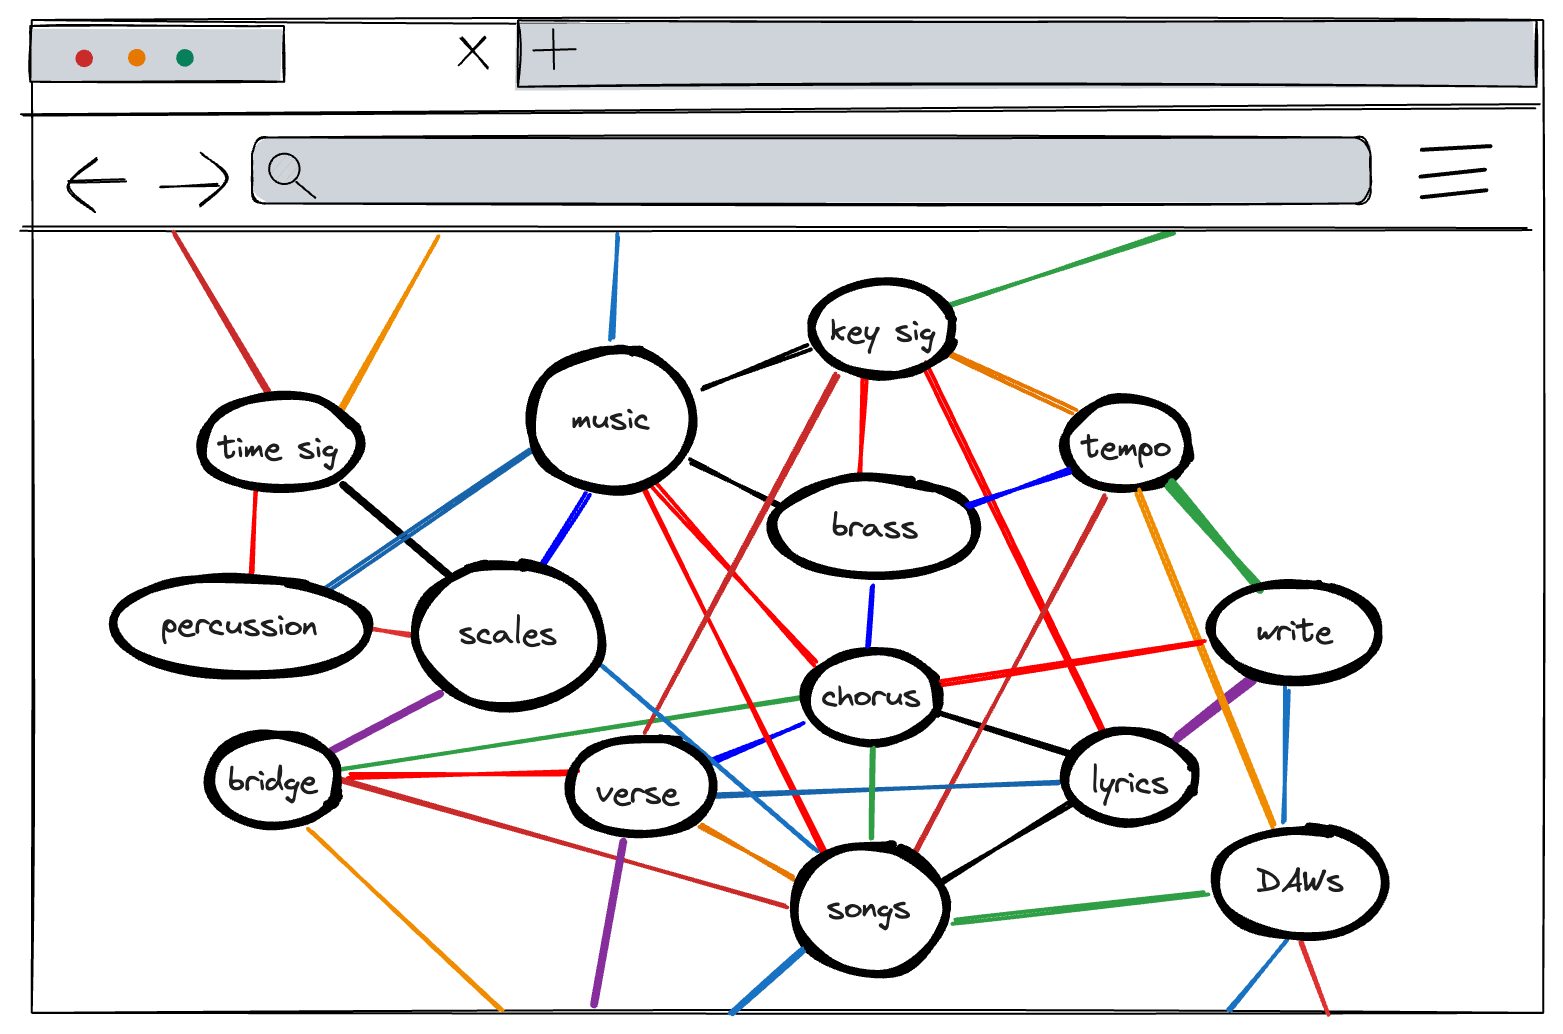 Illustrated mockup of a webpage with a lot of graph nodes similar to the networked graph described earlier, with even more nodes and links that lead off the page. Most of the nodes are the same size, none of the nodes are centered, and there are differently colored lines linking each node with some other nodes.